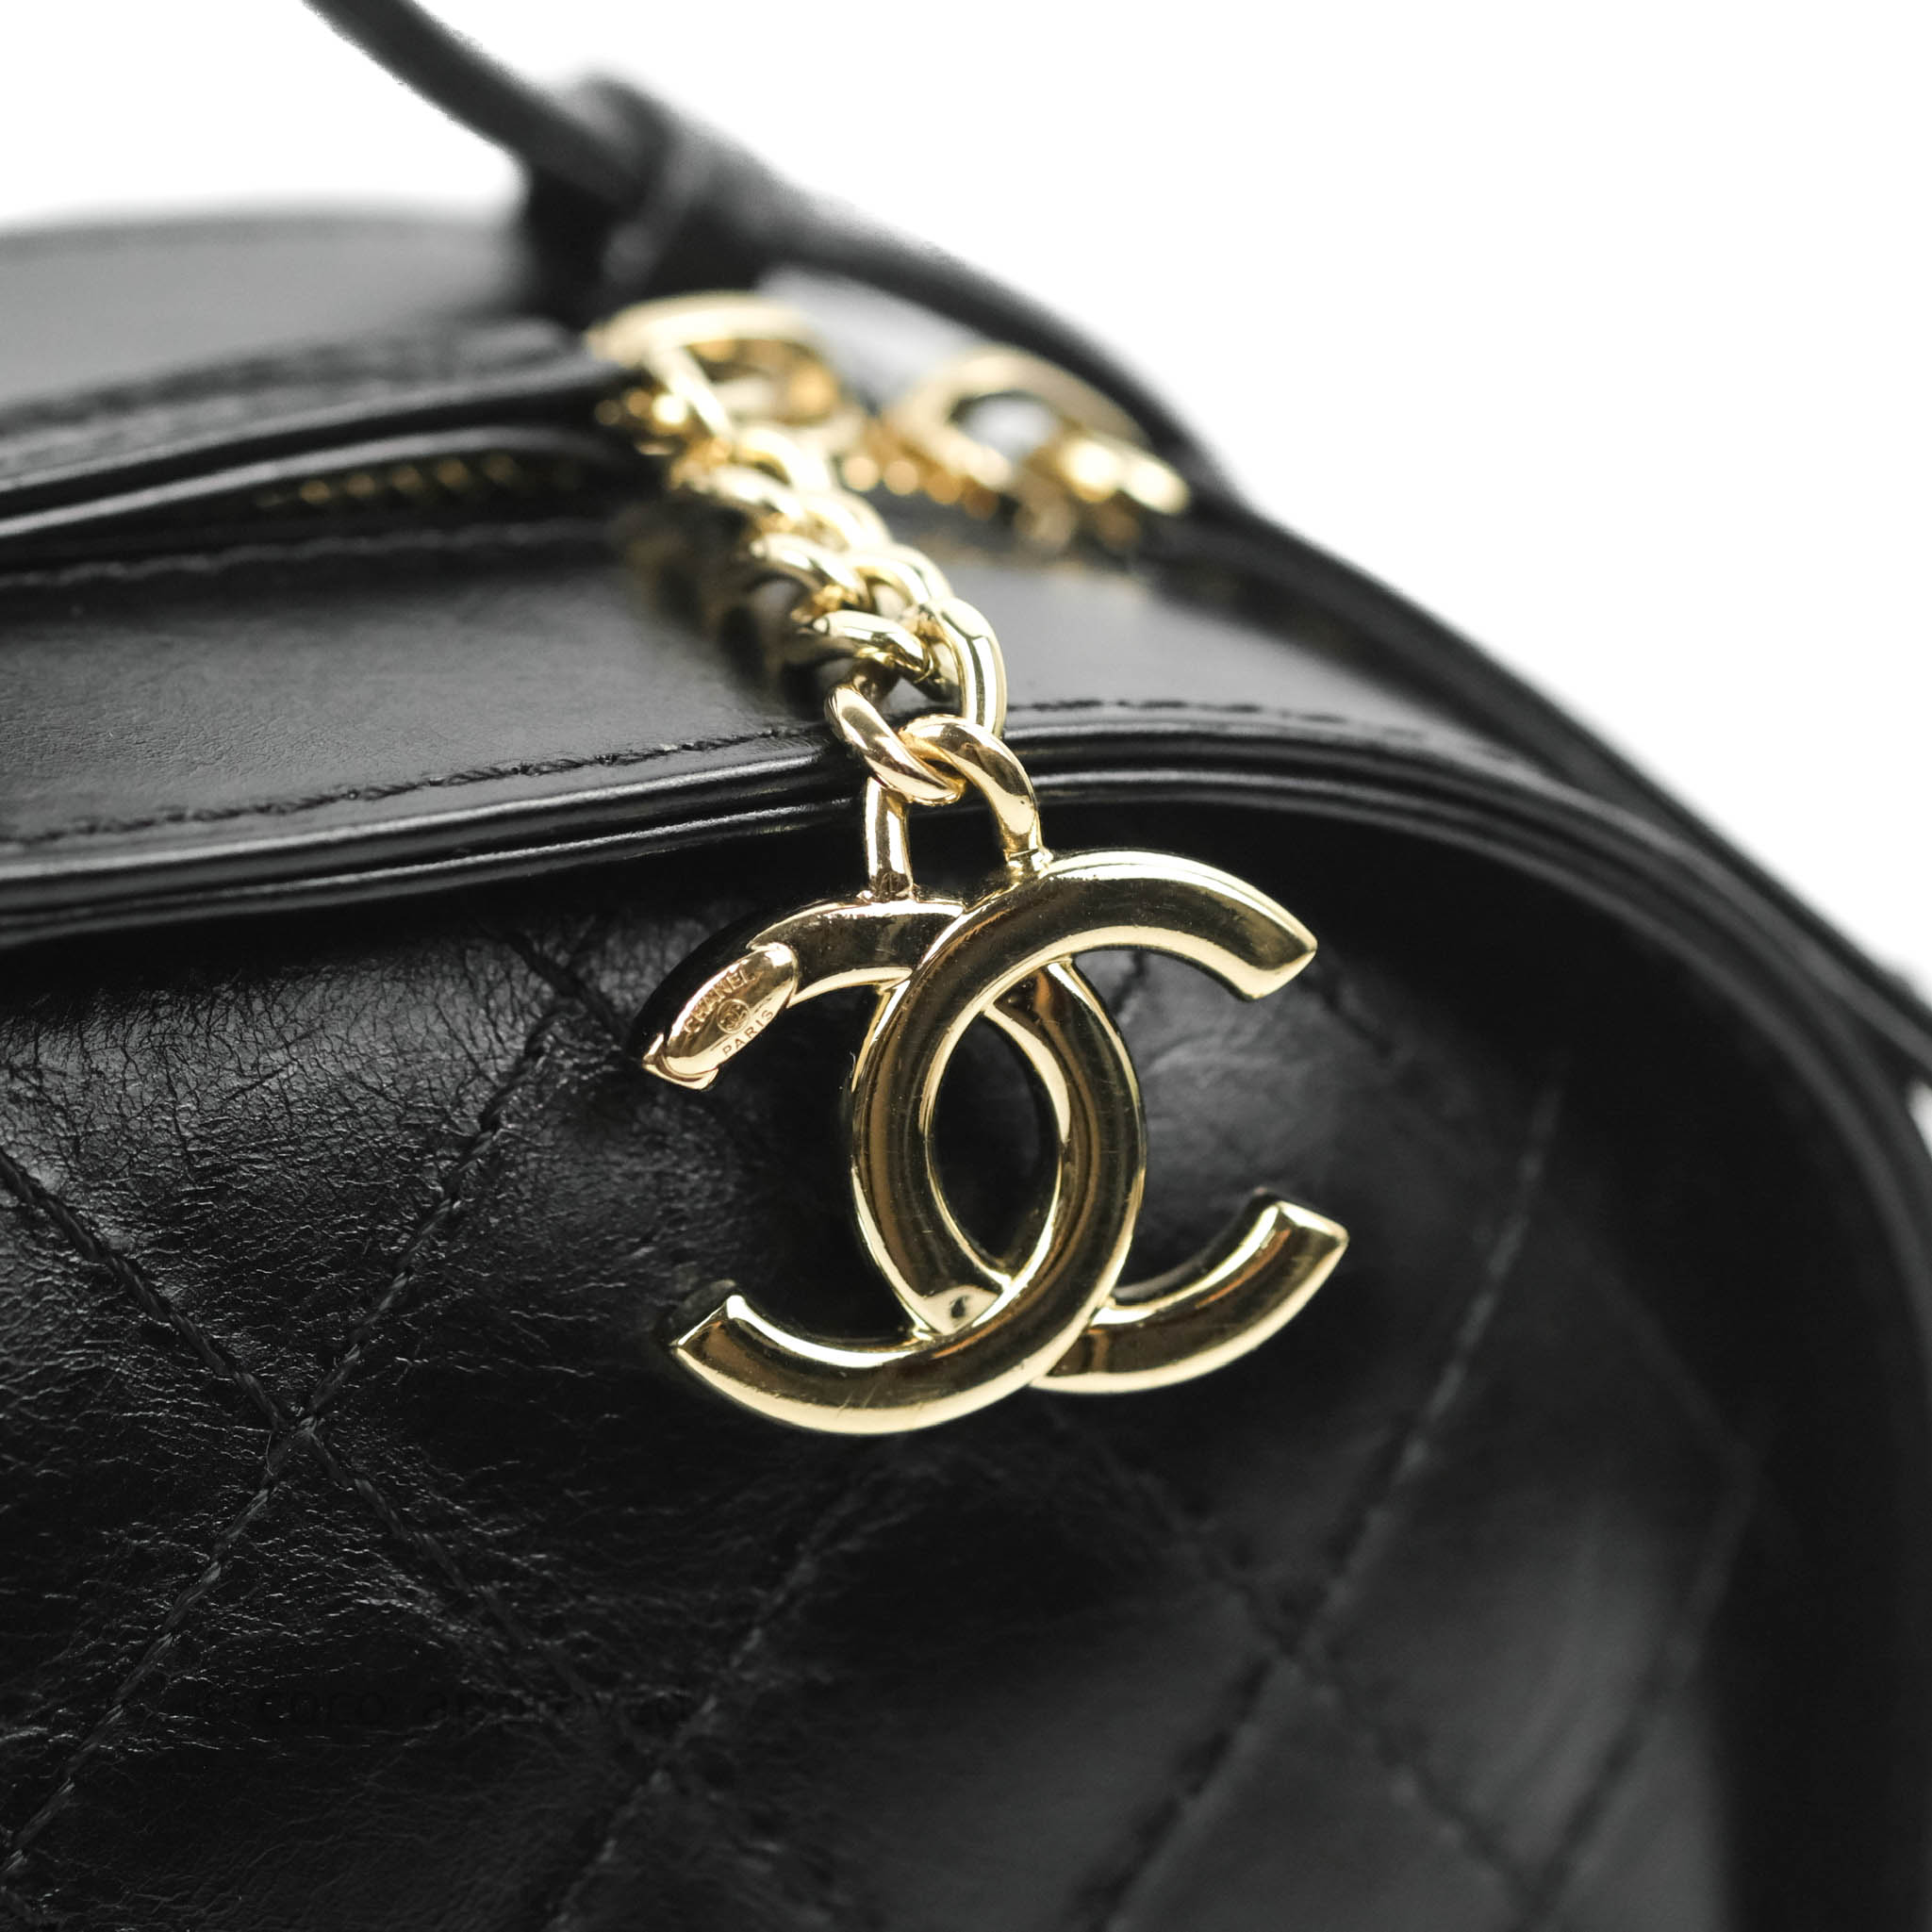 Chanel Vanity Case Bag Unboxing & Review